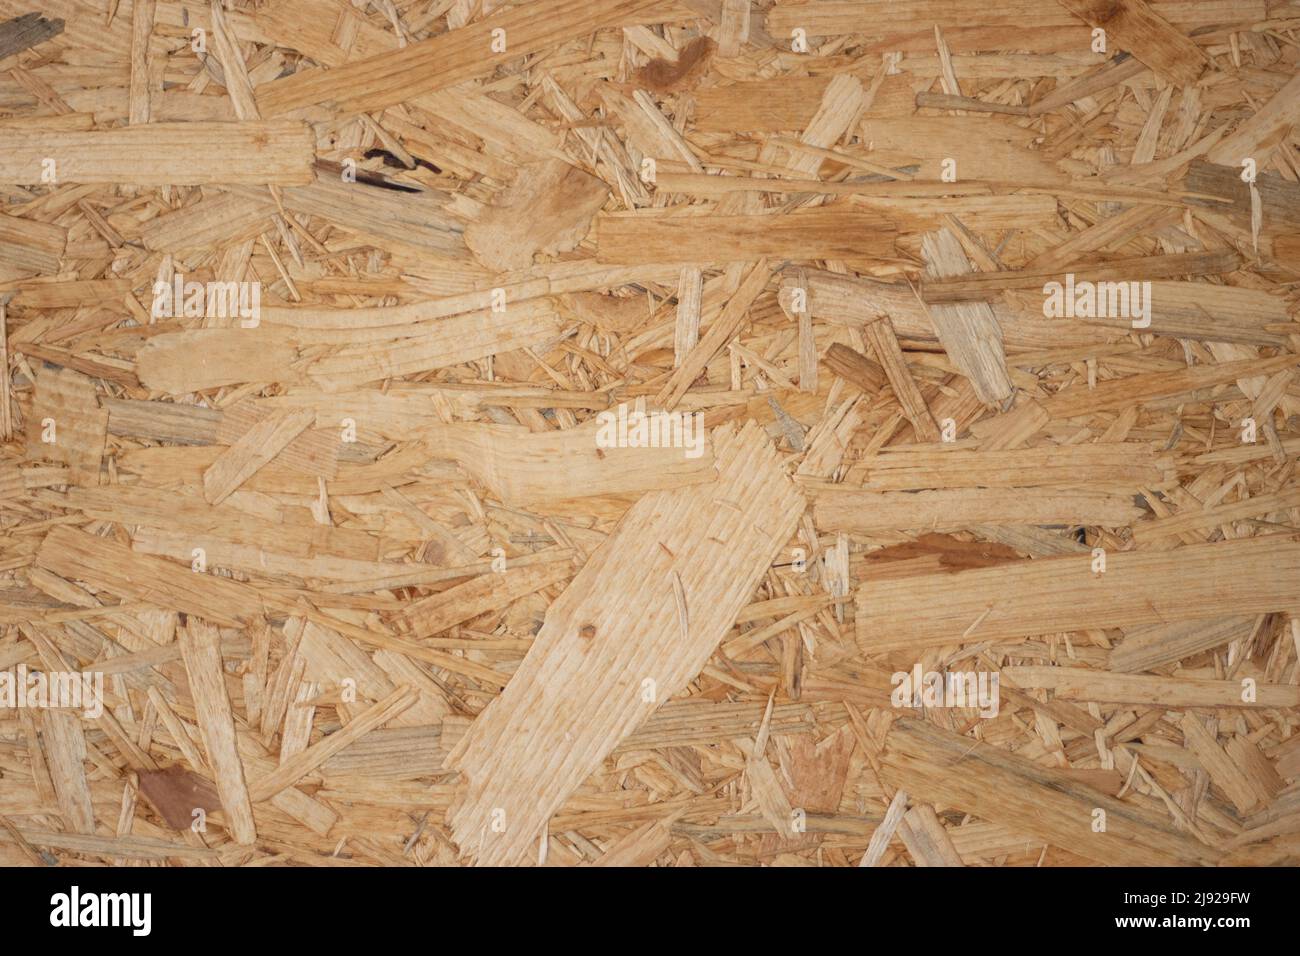 Photo of construction material, close up wood chips pattern. Stock Photo